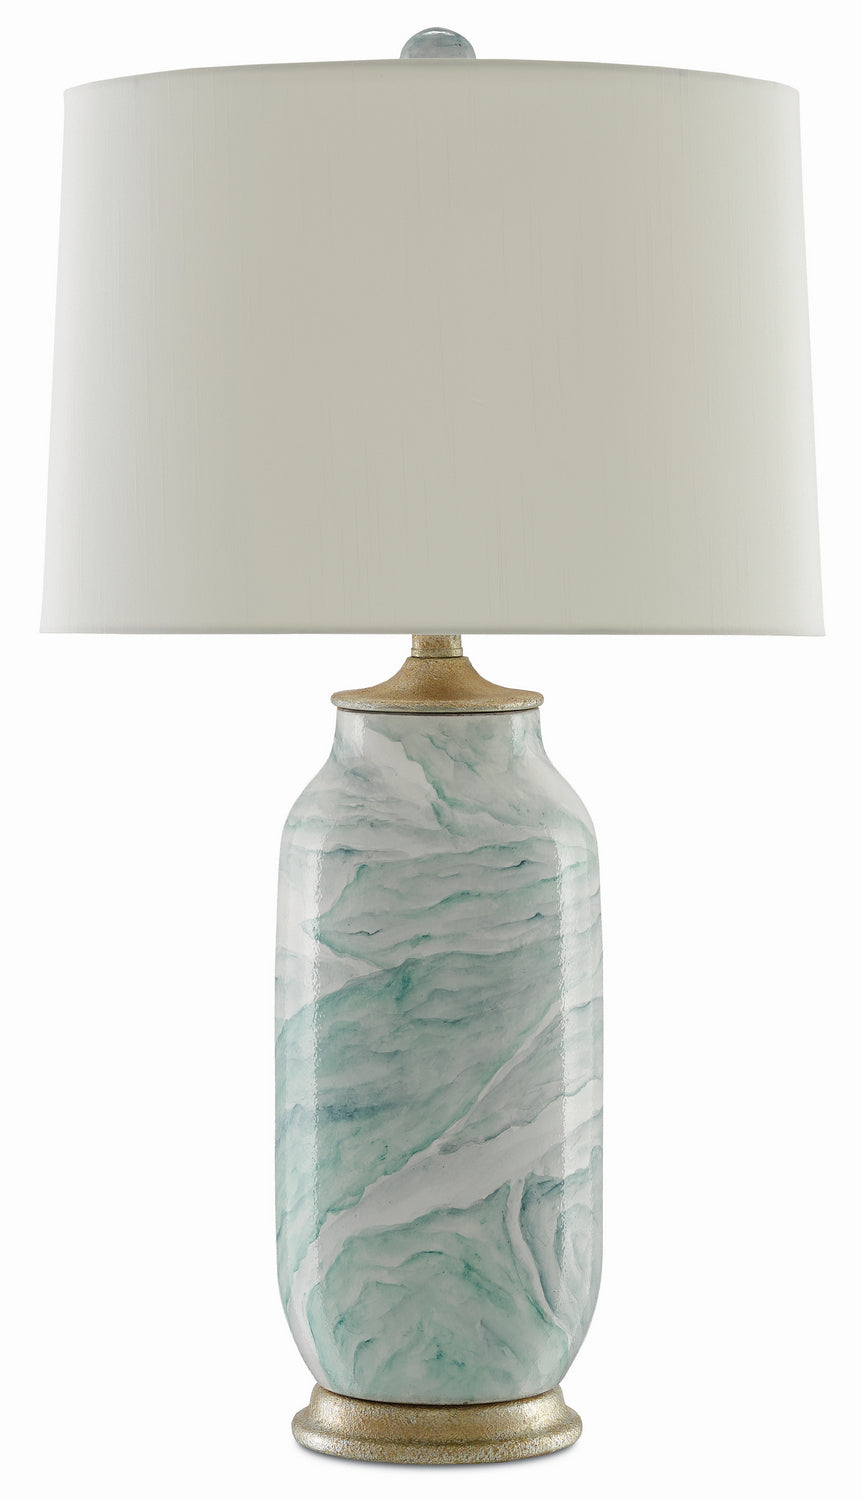 One Light Table Lamp from the Sarcelle collection in Sea Foam/Harlow Silver Leaf finish